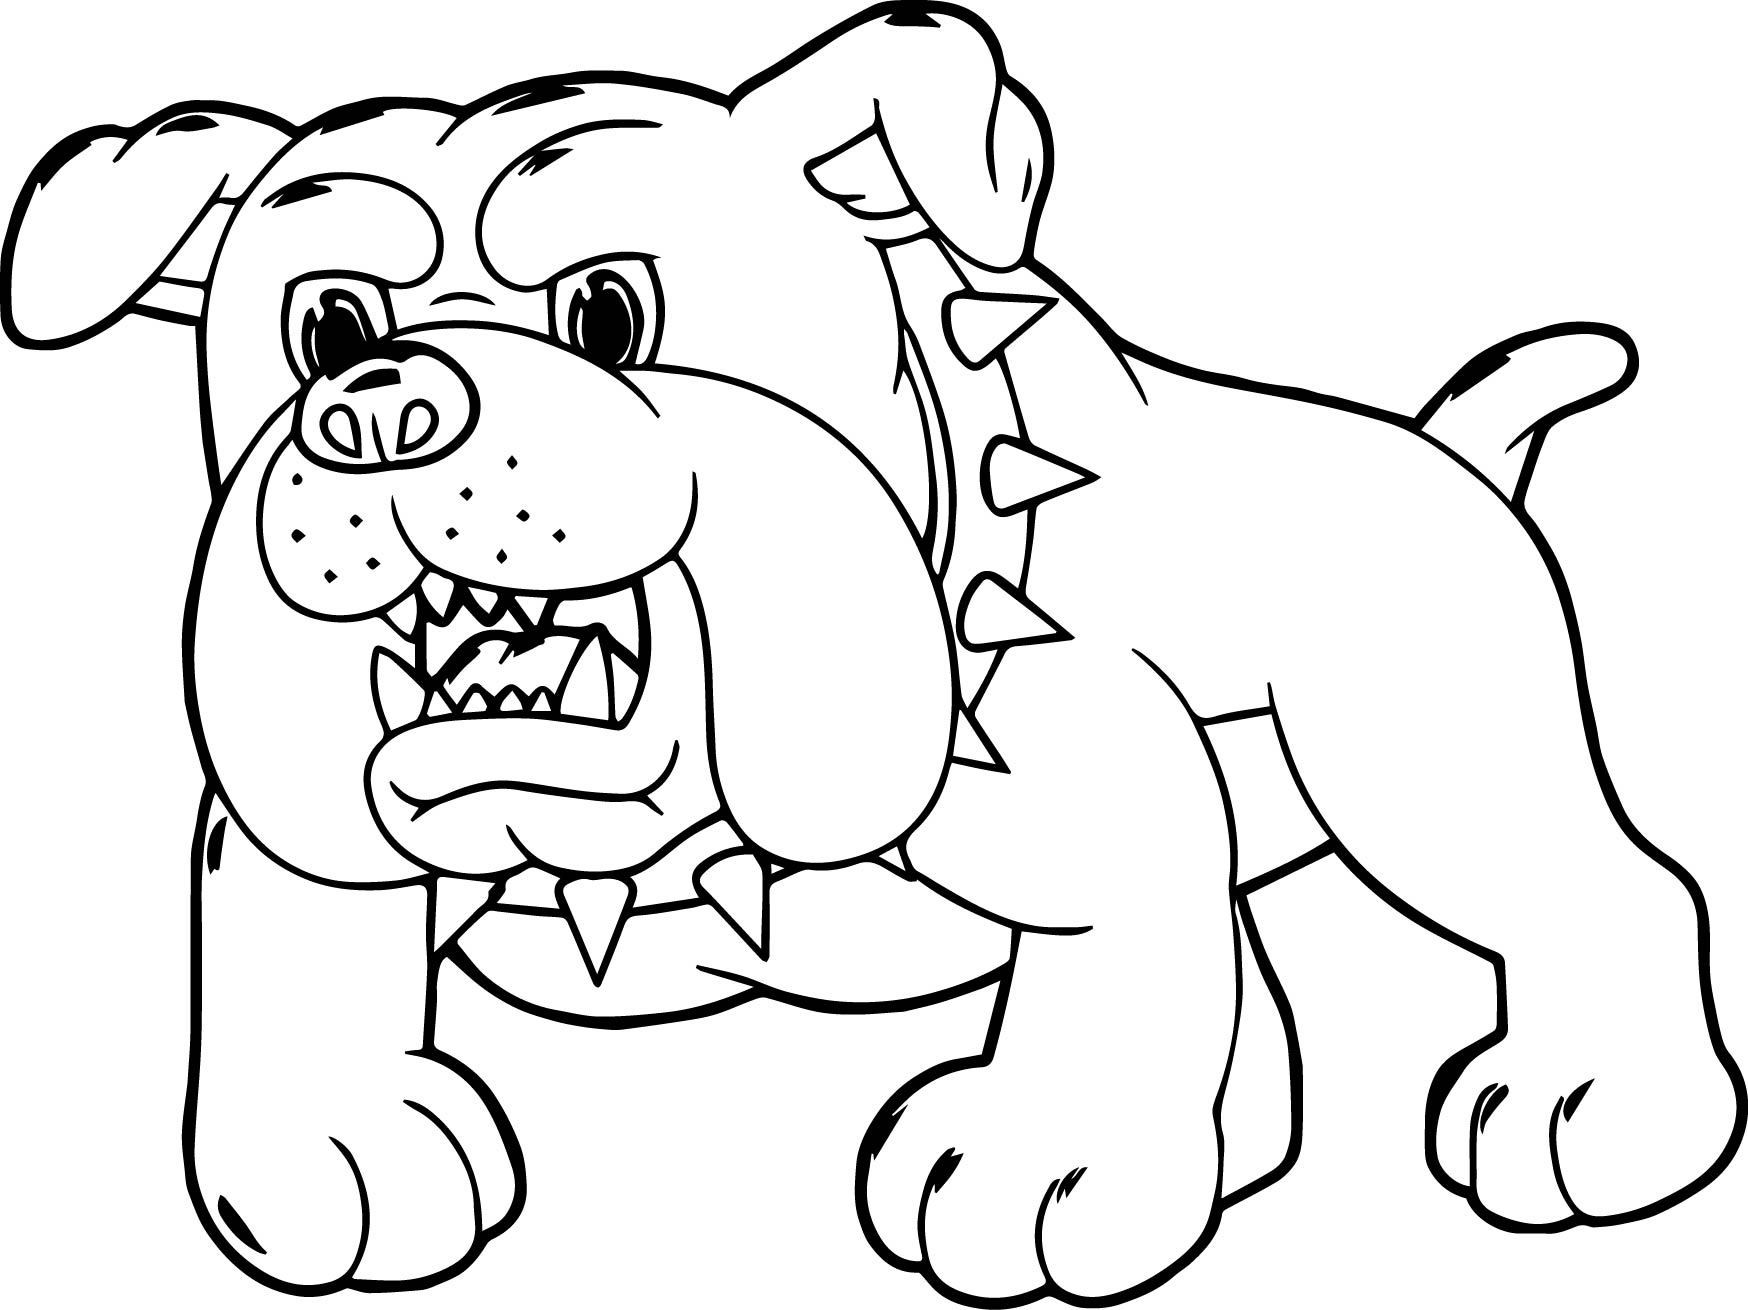 Puppy Dog Coloring Pages
 100 Cute Cartoon Dogs Coloring Page Puppy To